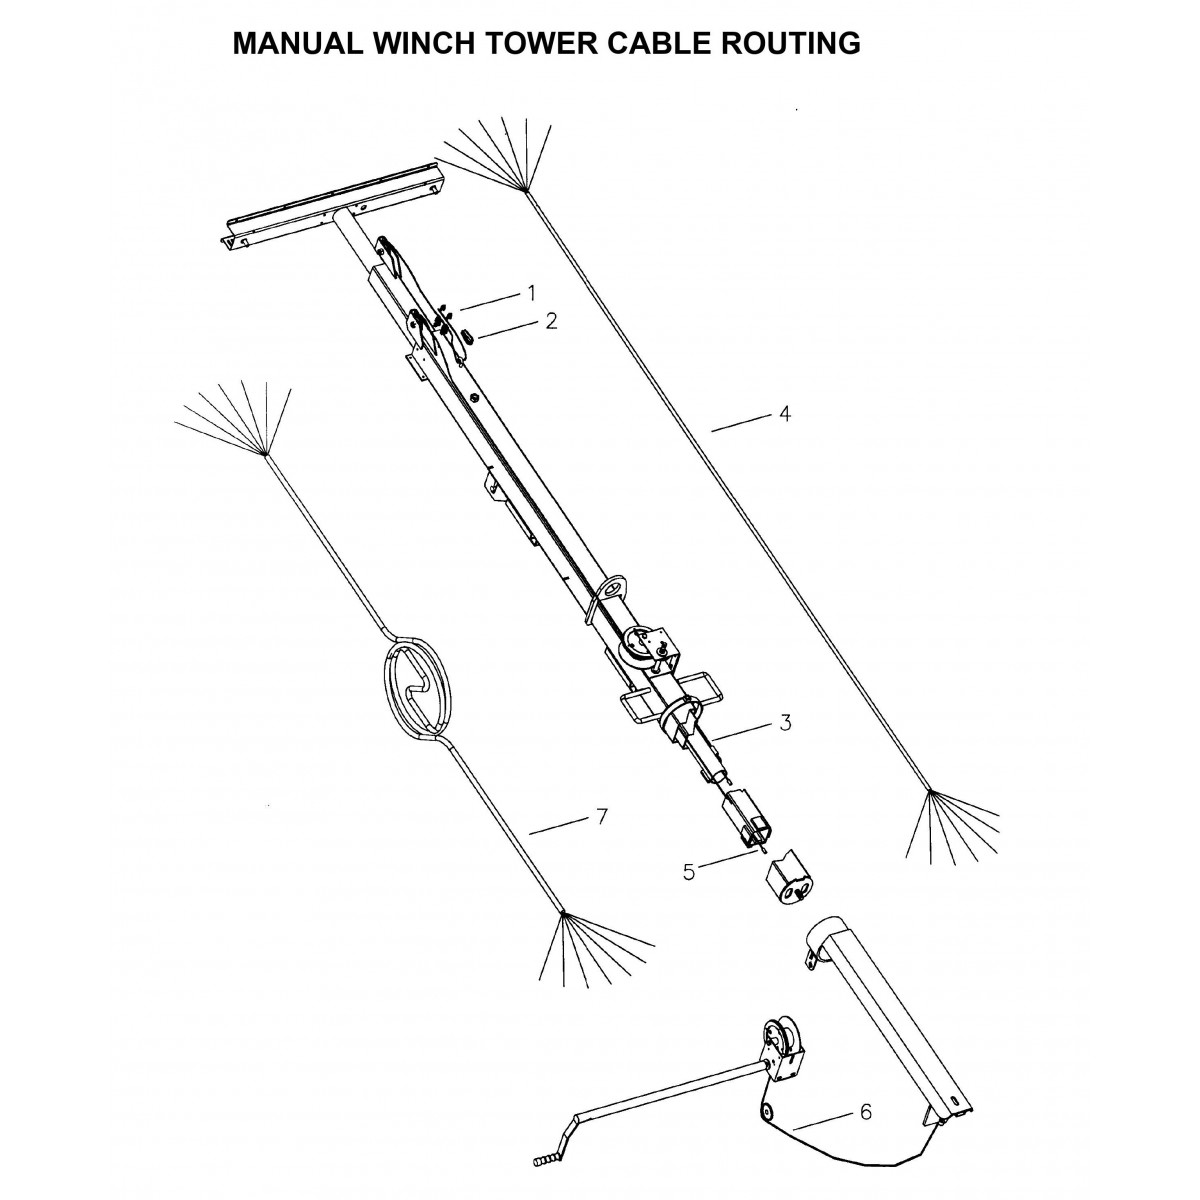 Manual Winch Tower Cable Routing Parts